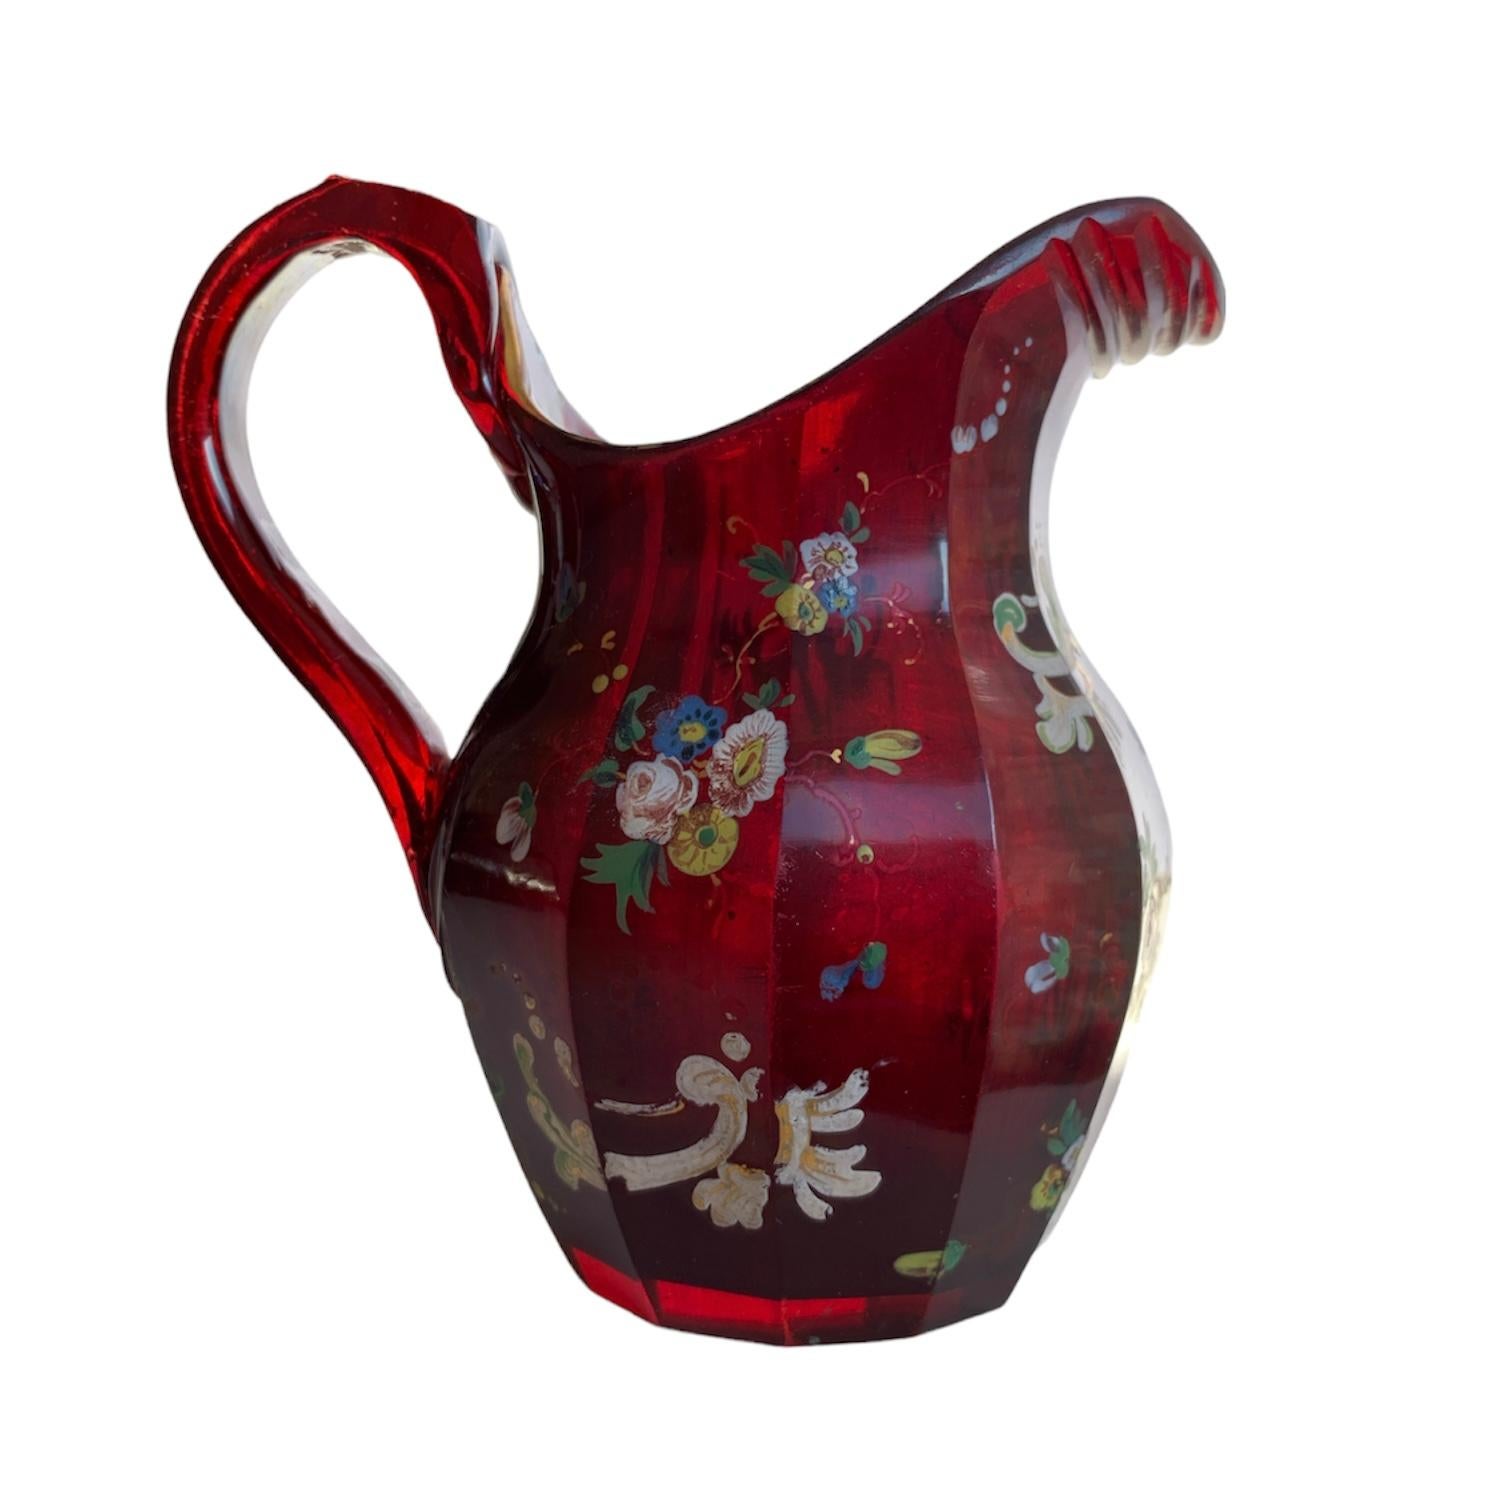 Antique Bohemian Ruby Red Enameled Glass Jug, Pitcher, 19th Century 1